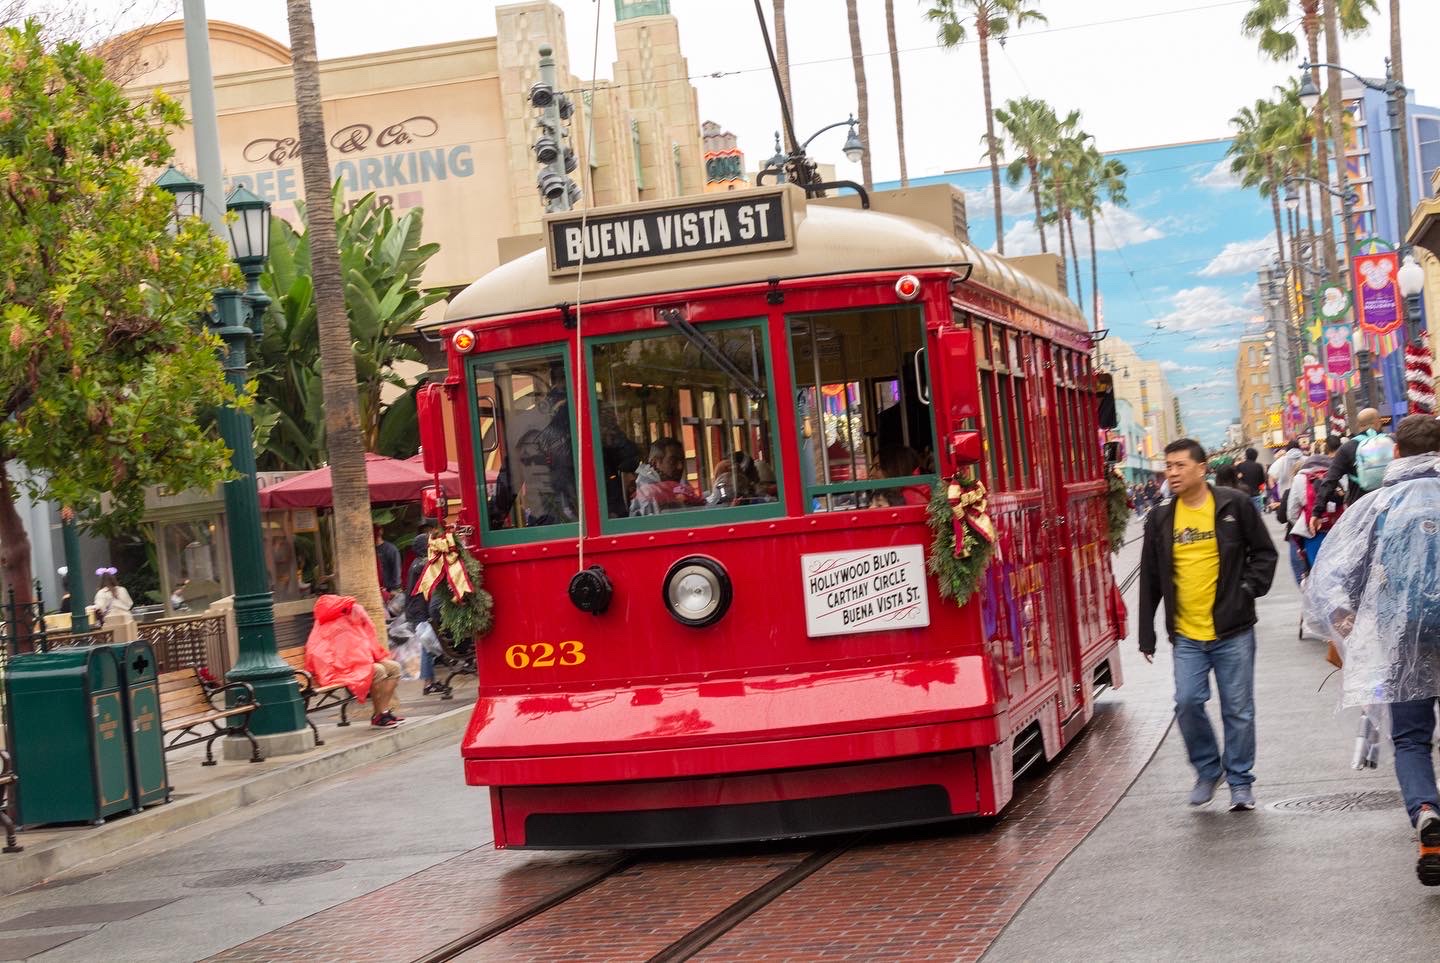 A red streetcar moves away down a theme park street, its destination sign reading Hollywood